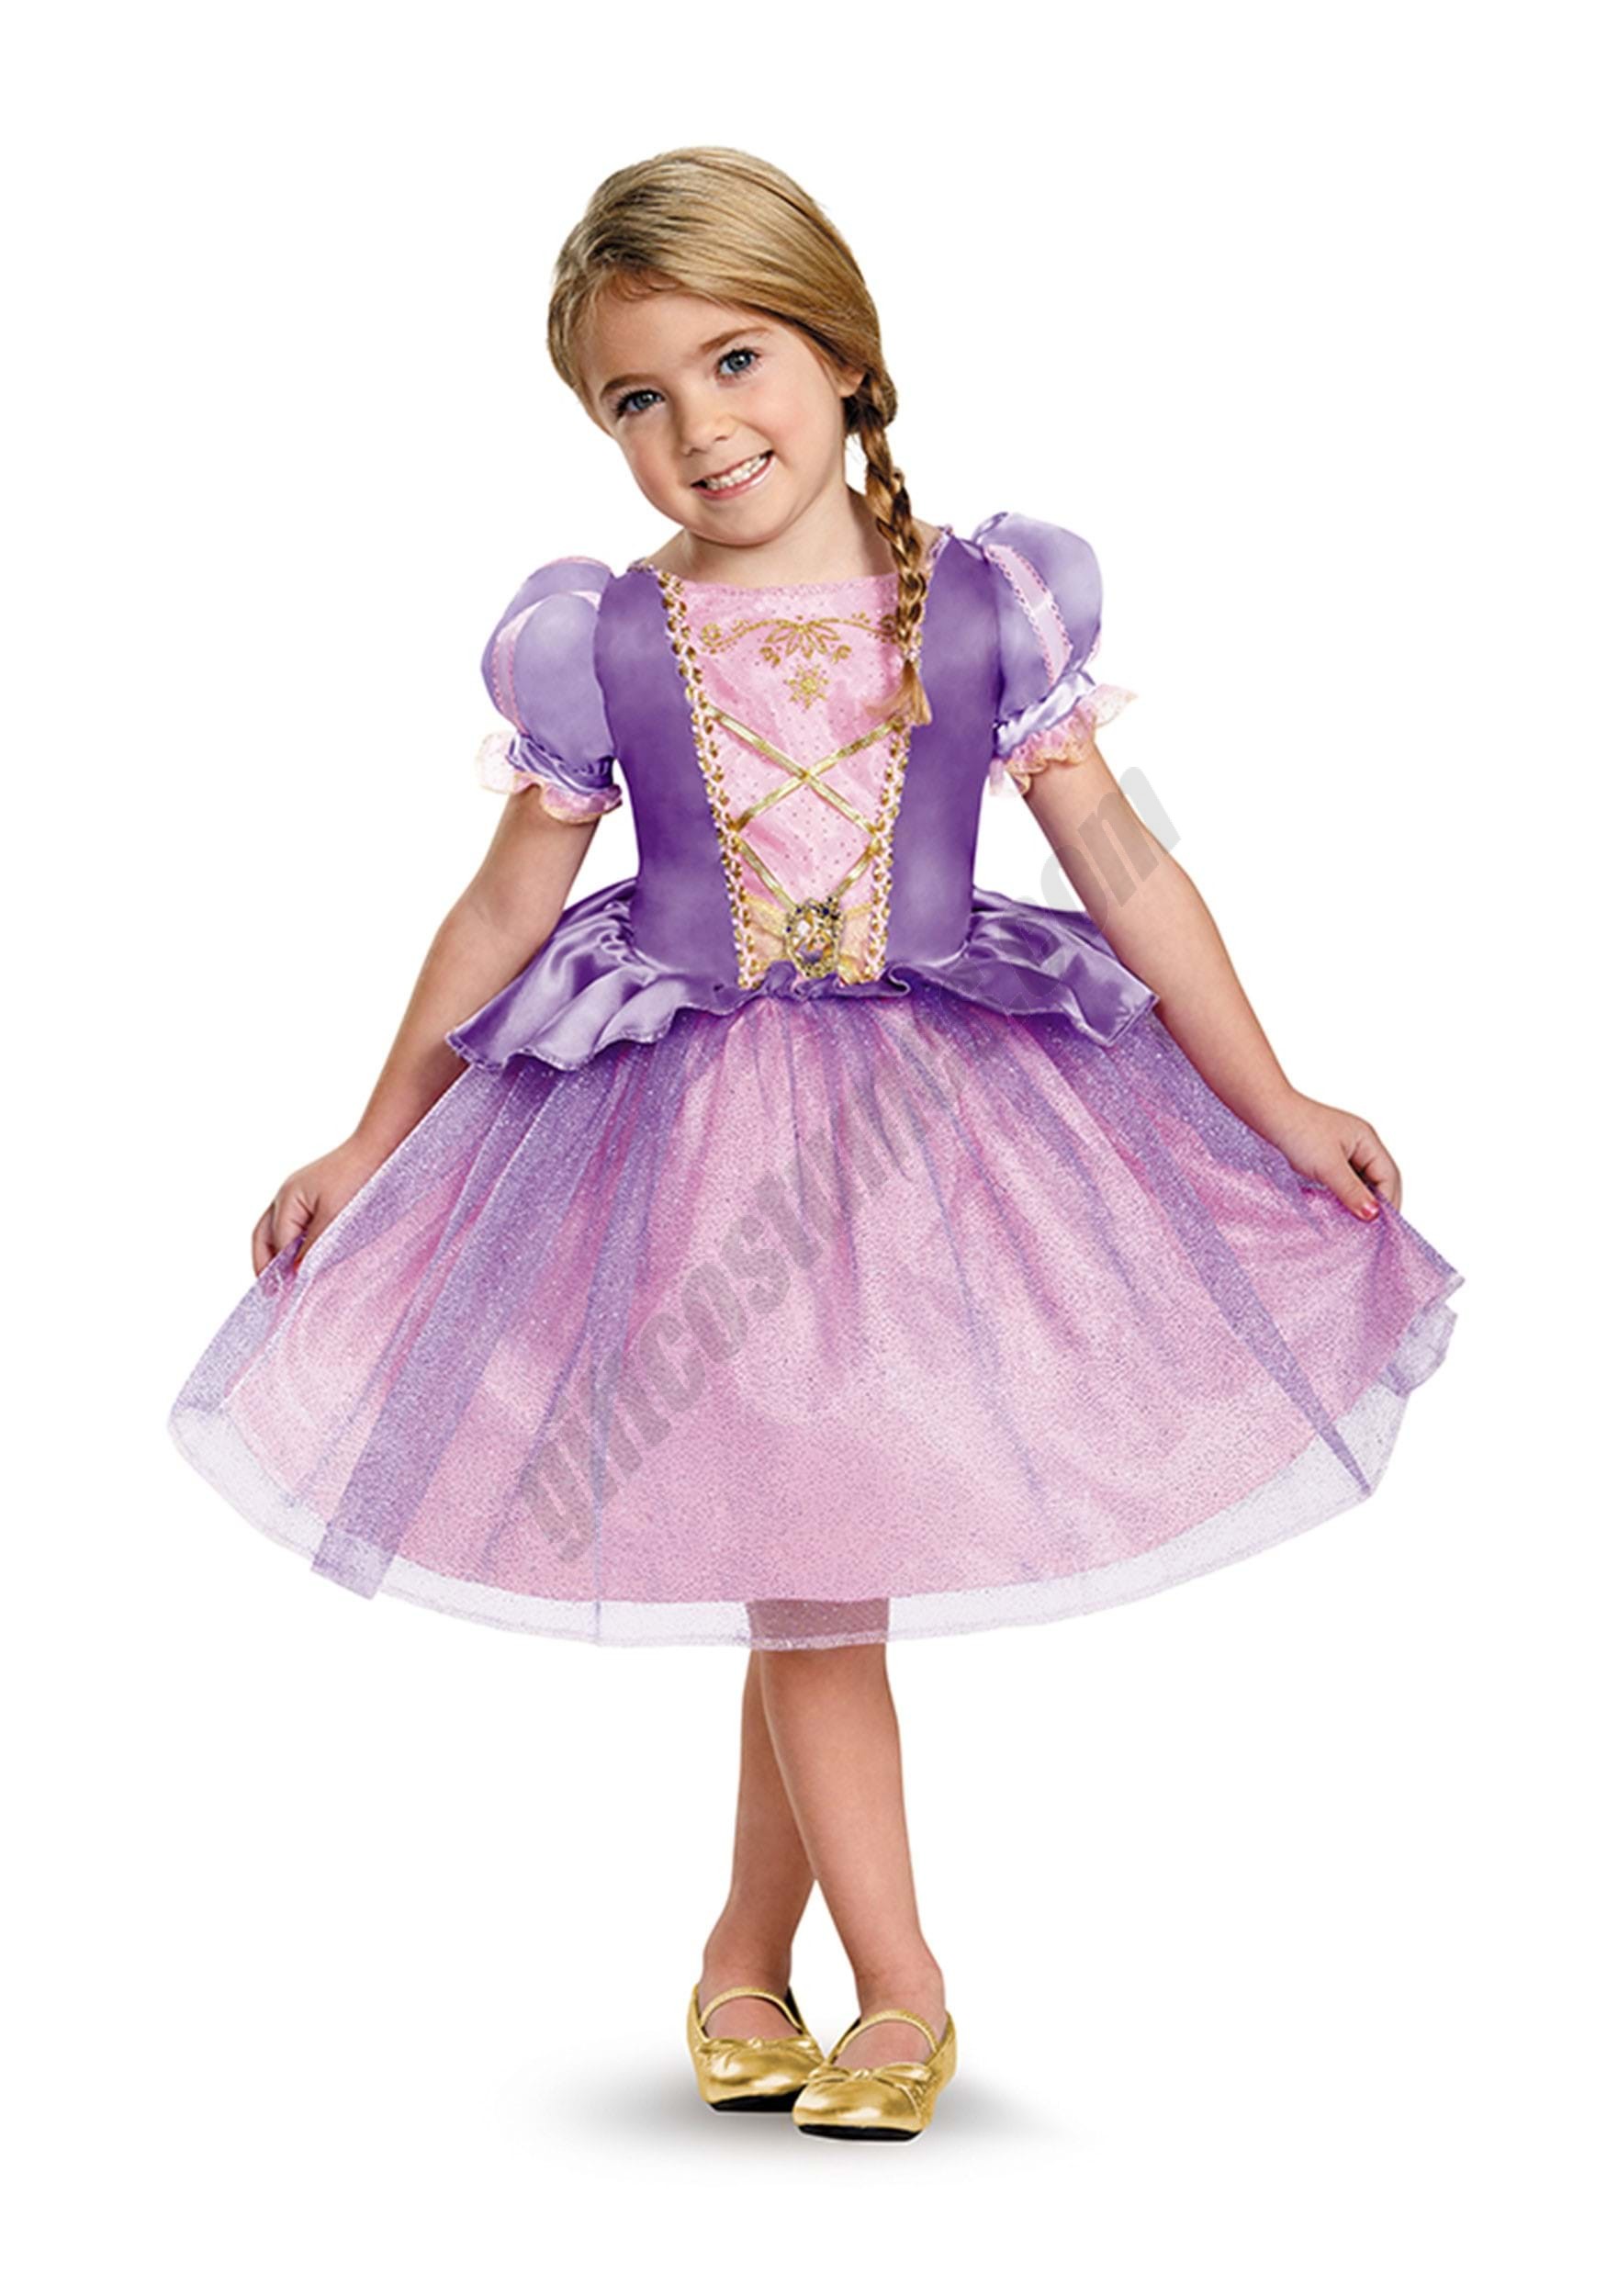 Tangled Rapunzel Classic Costume for Toddlers Promotions - Tangled Rapunzel Classic Costume for Toddlers Promotions